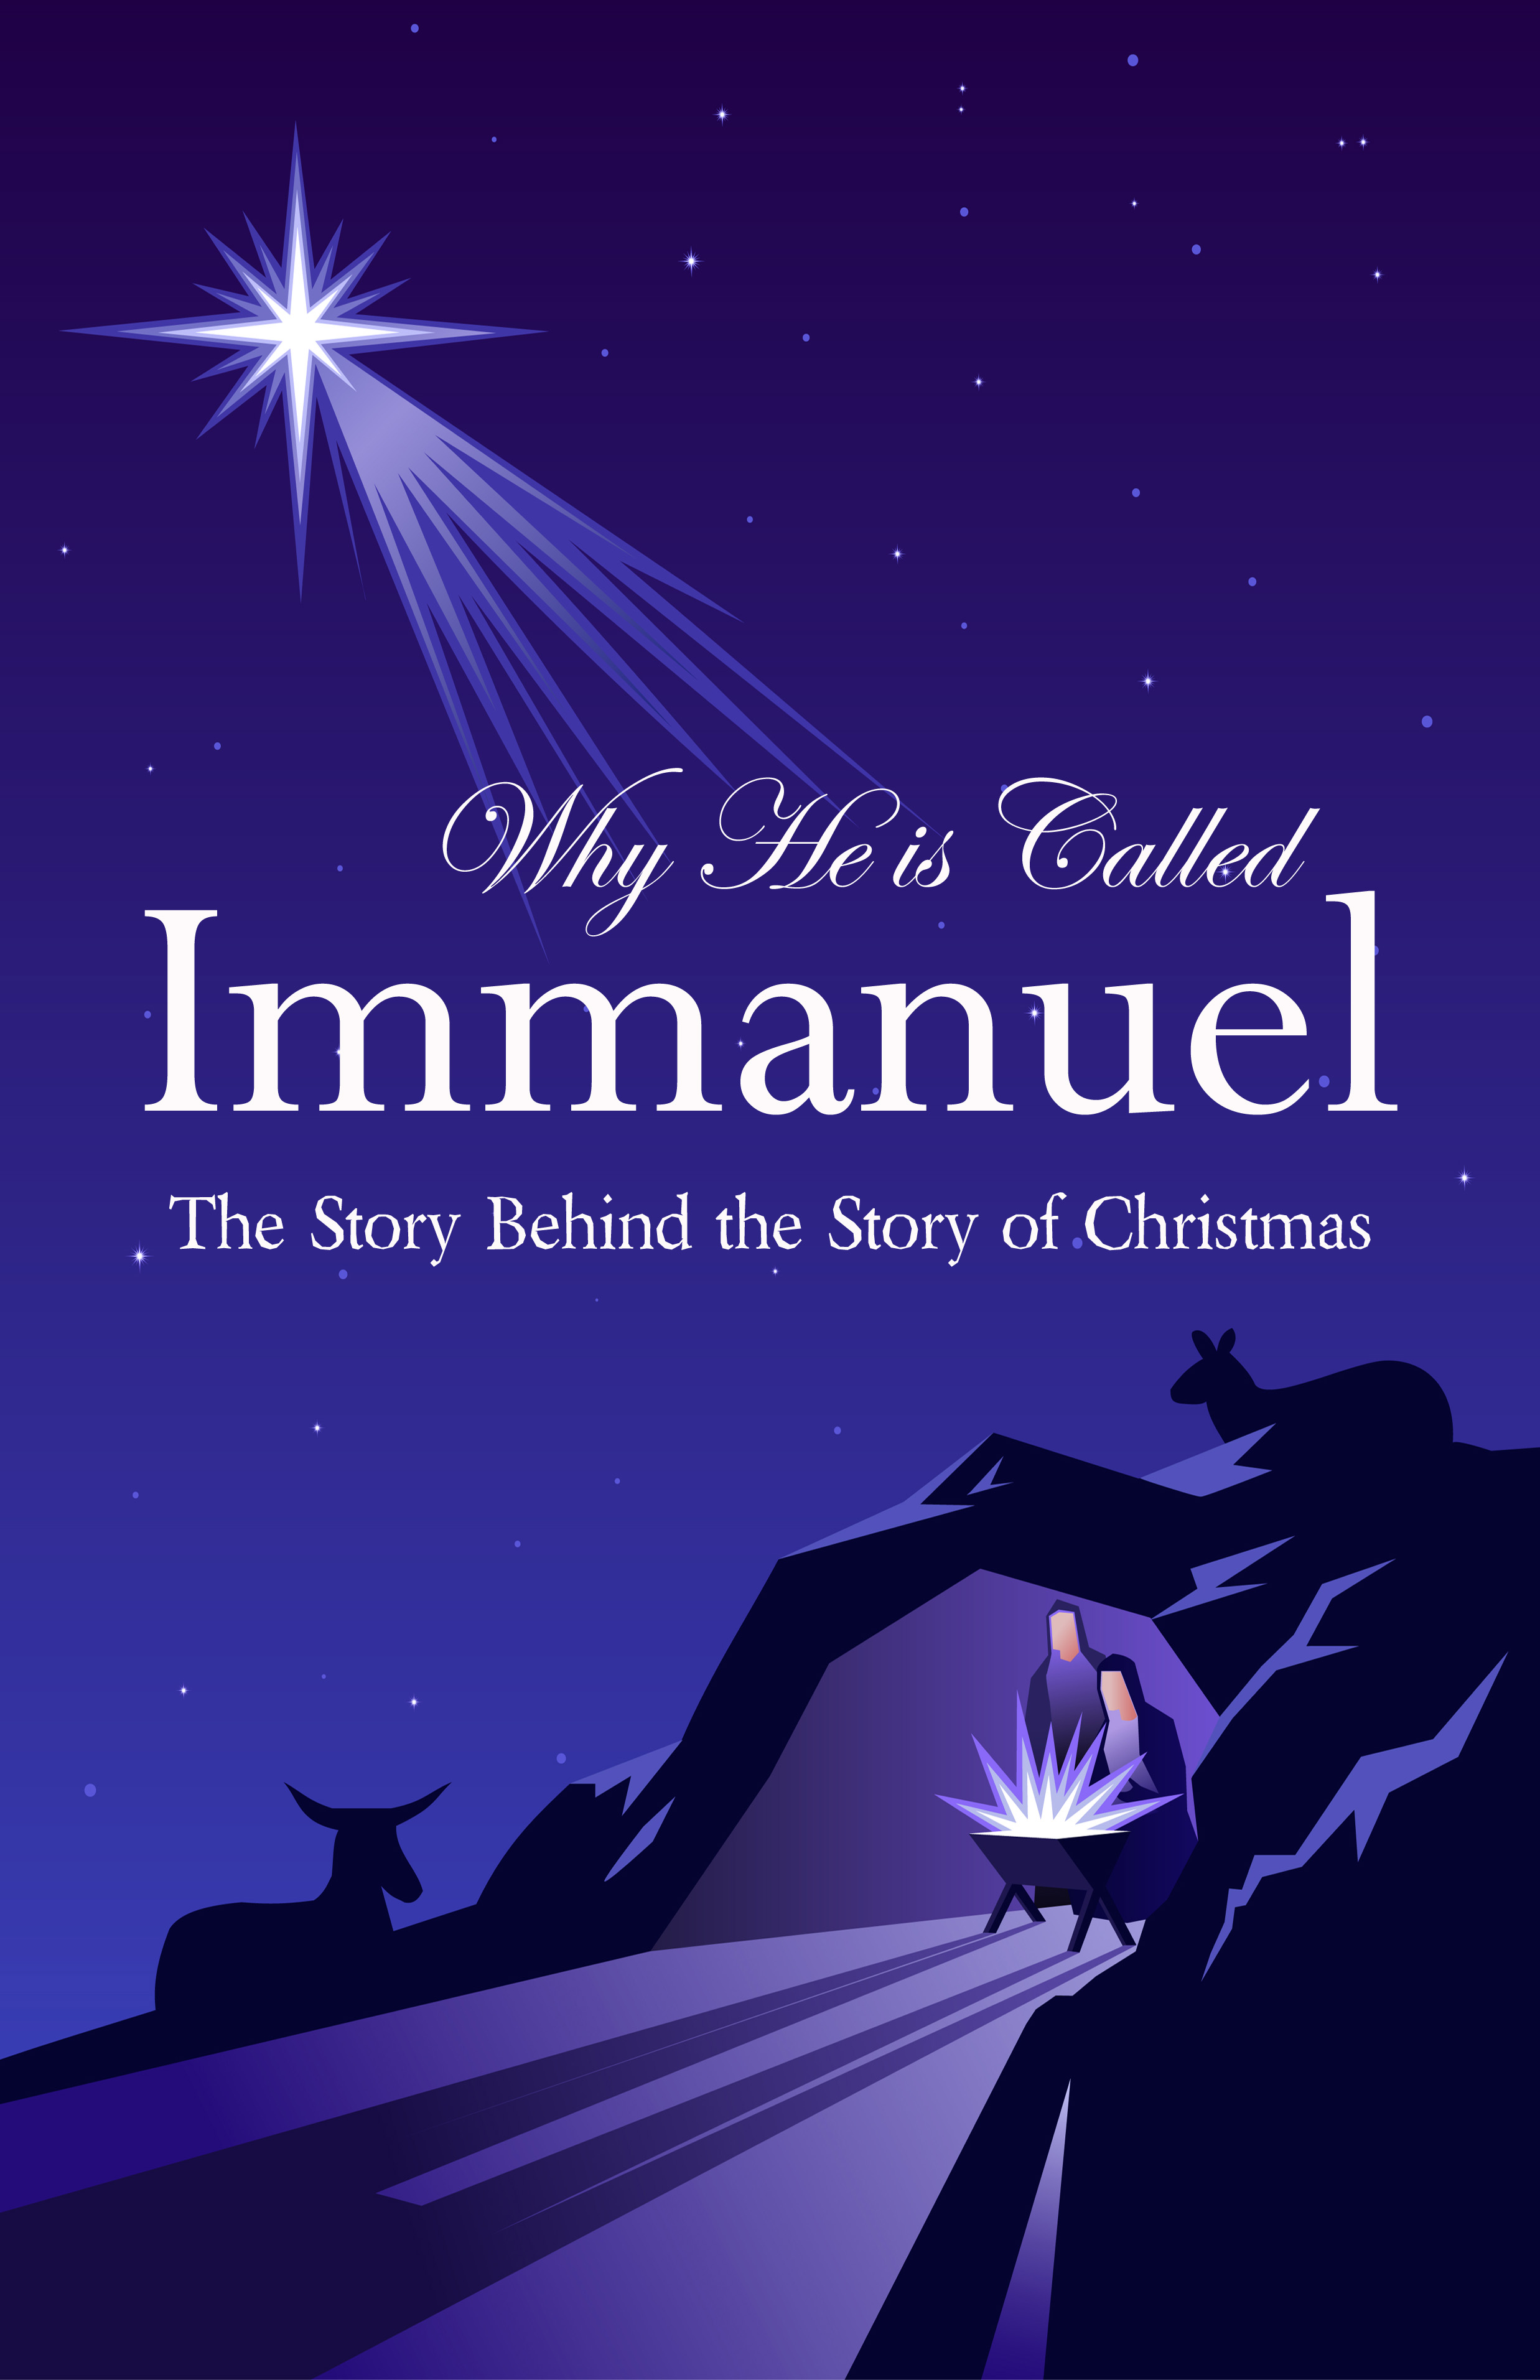 Why He is Called Immanuel: The Story Behind the Story of Christmas